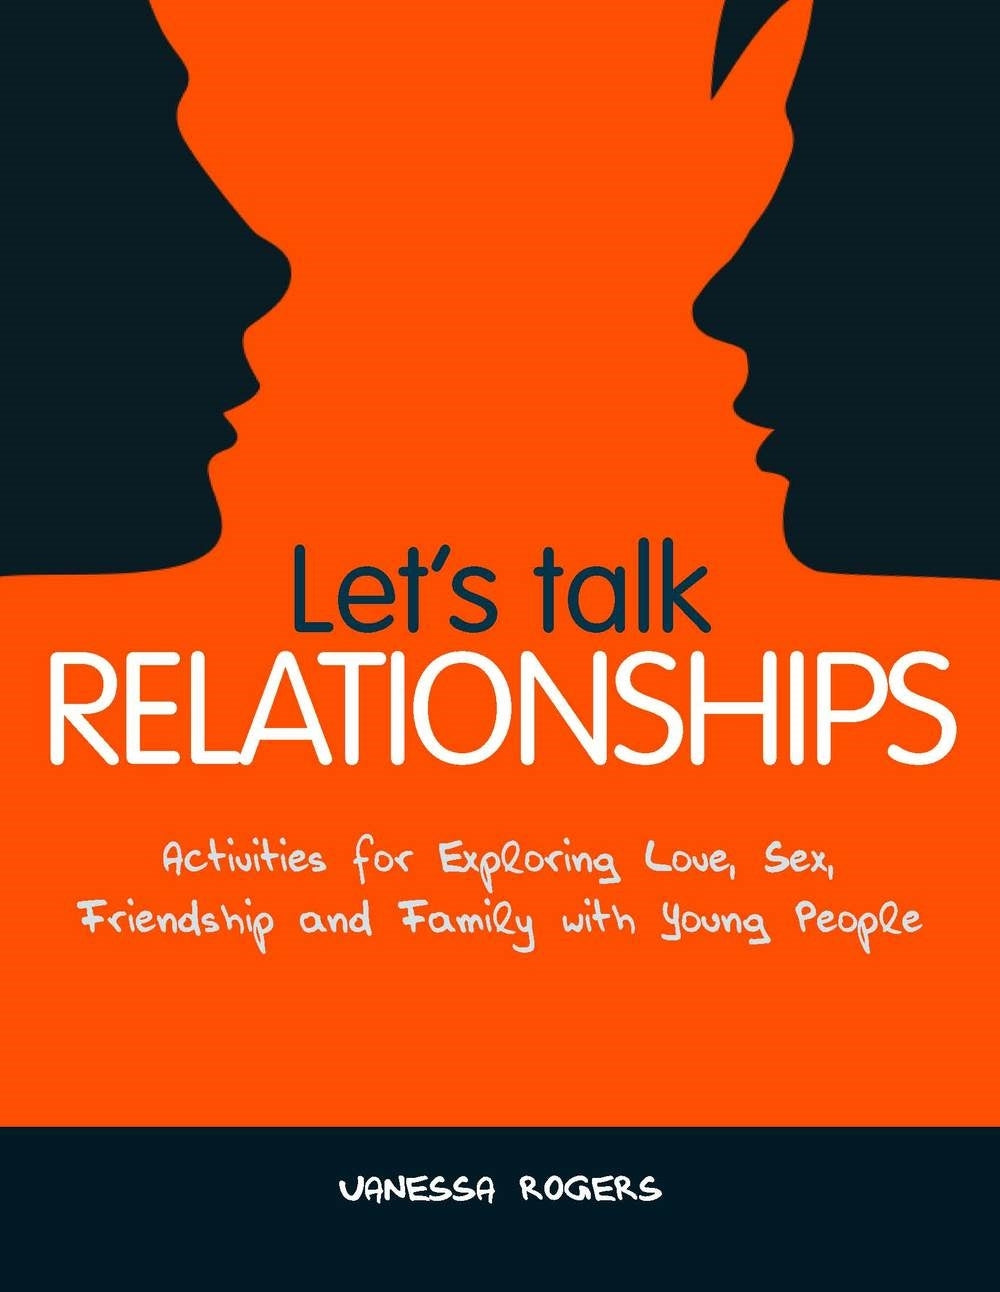 Let's Talk Relationships by Vanessa Rogers